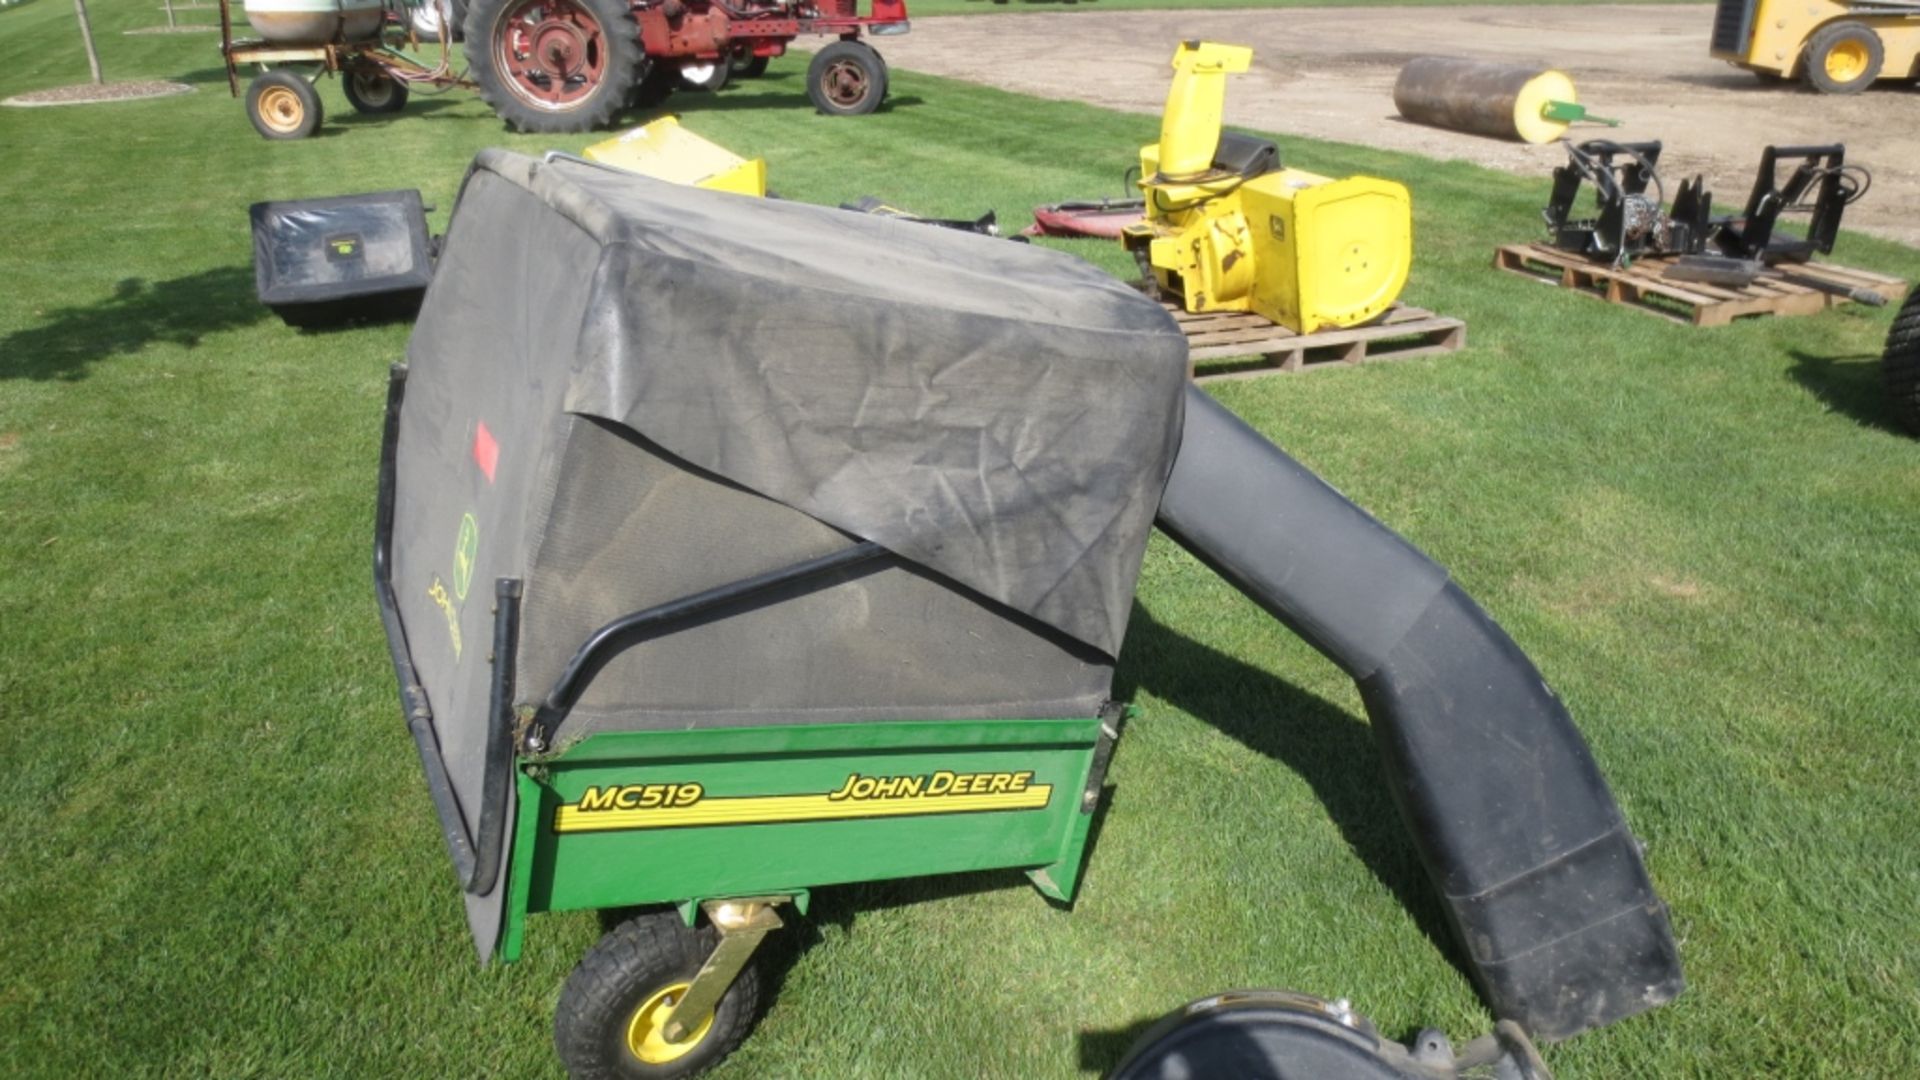 John Deere MC519 collection system for rider mower Rear mount grass & leaf collection system for